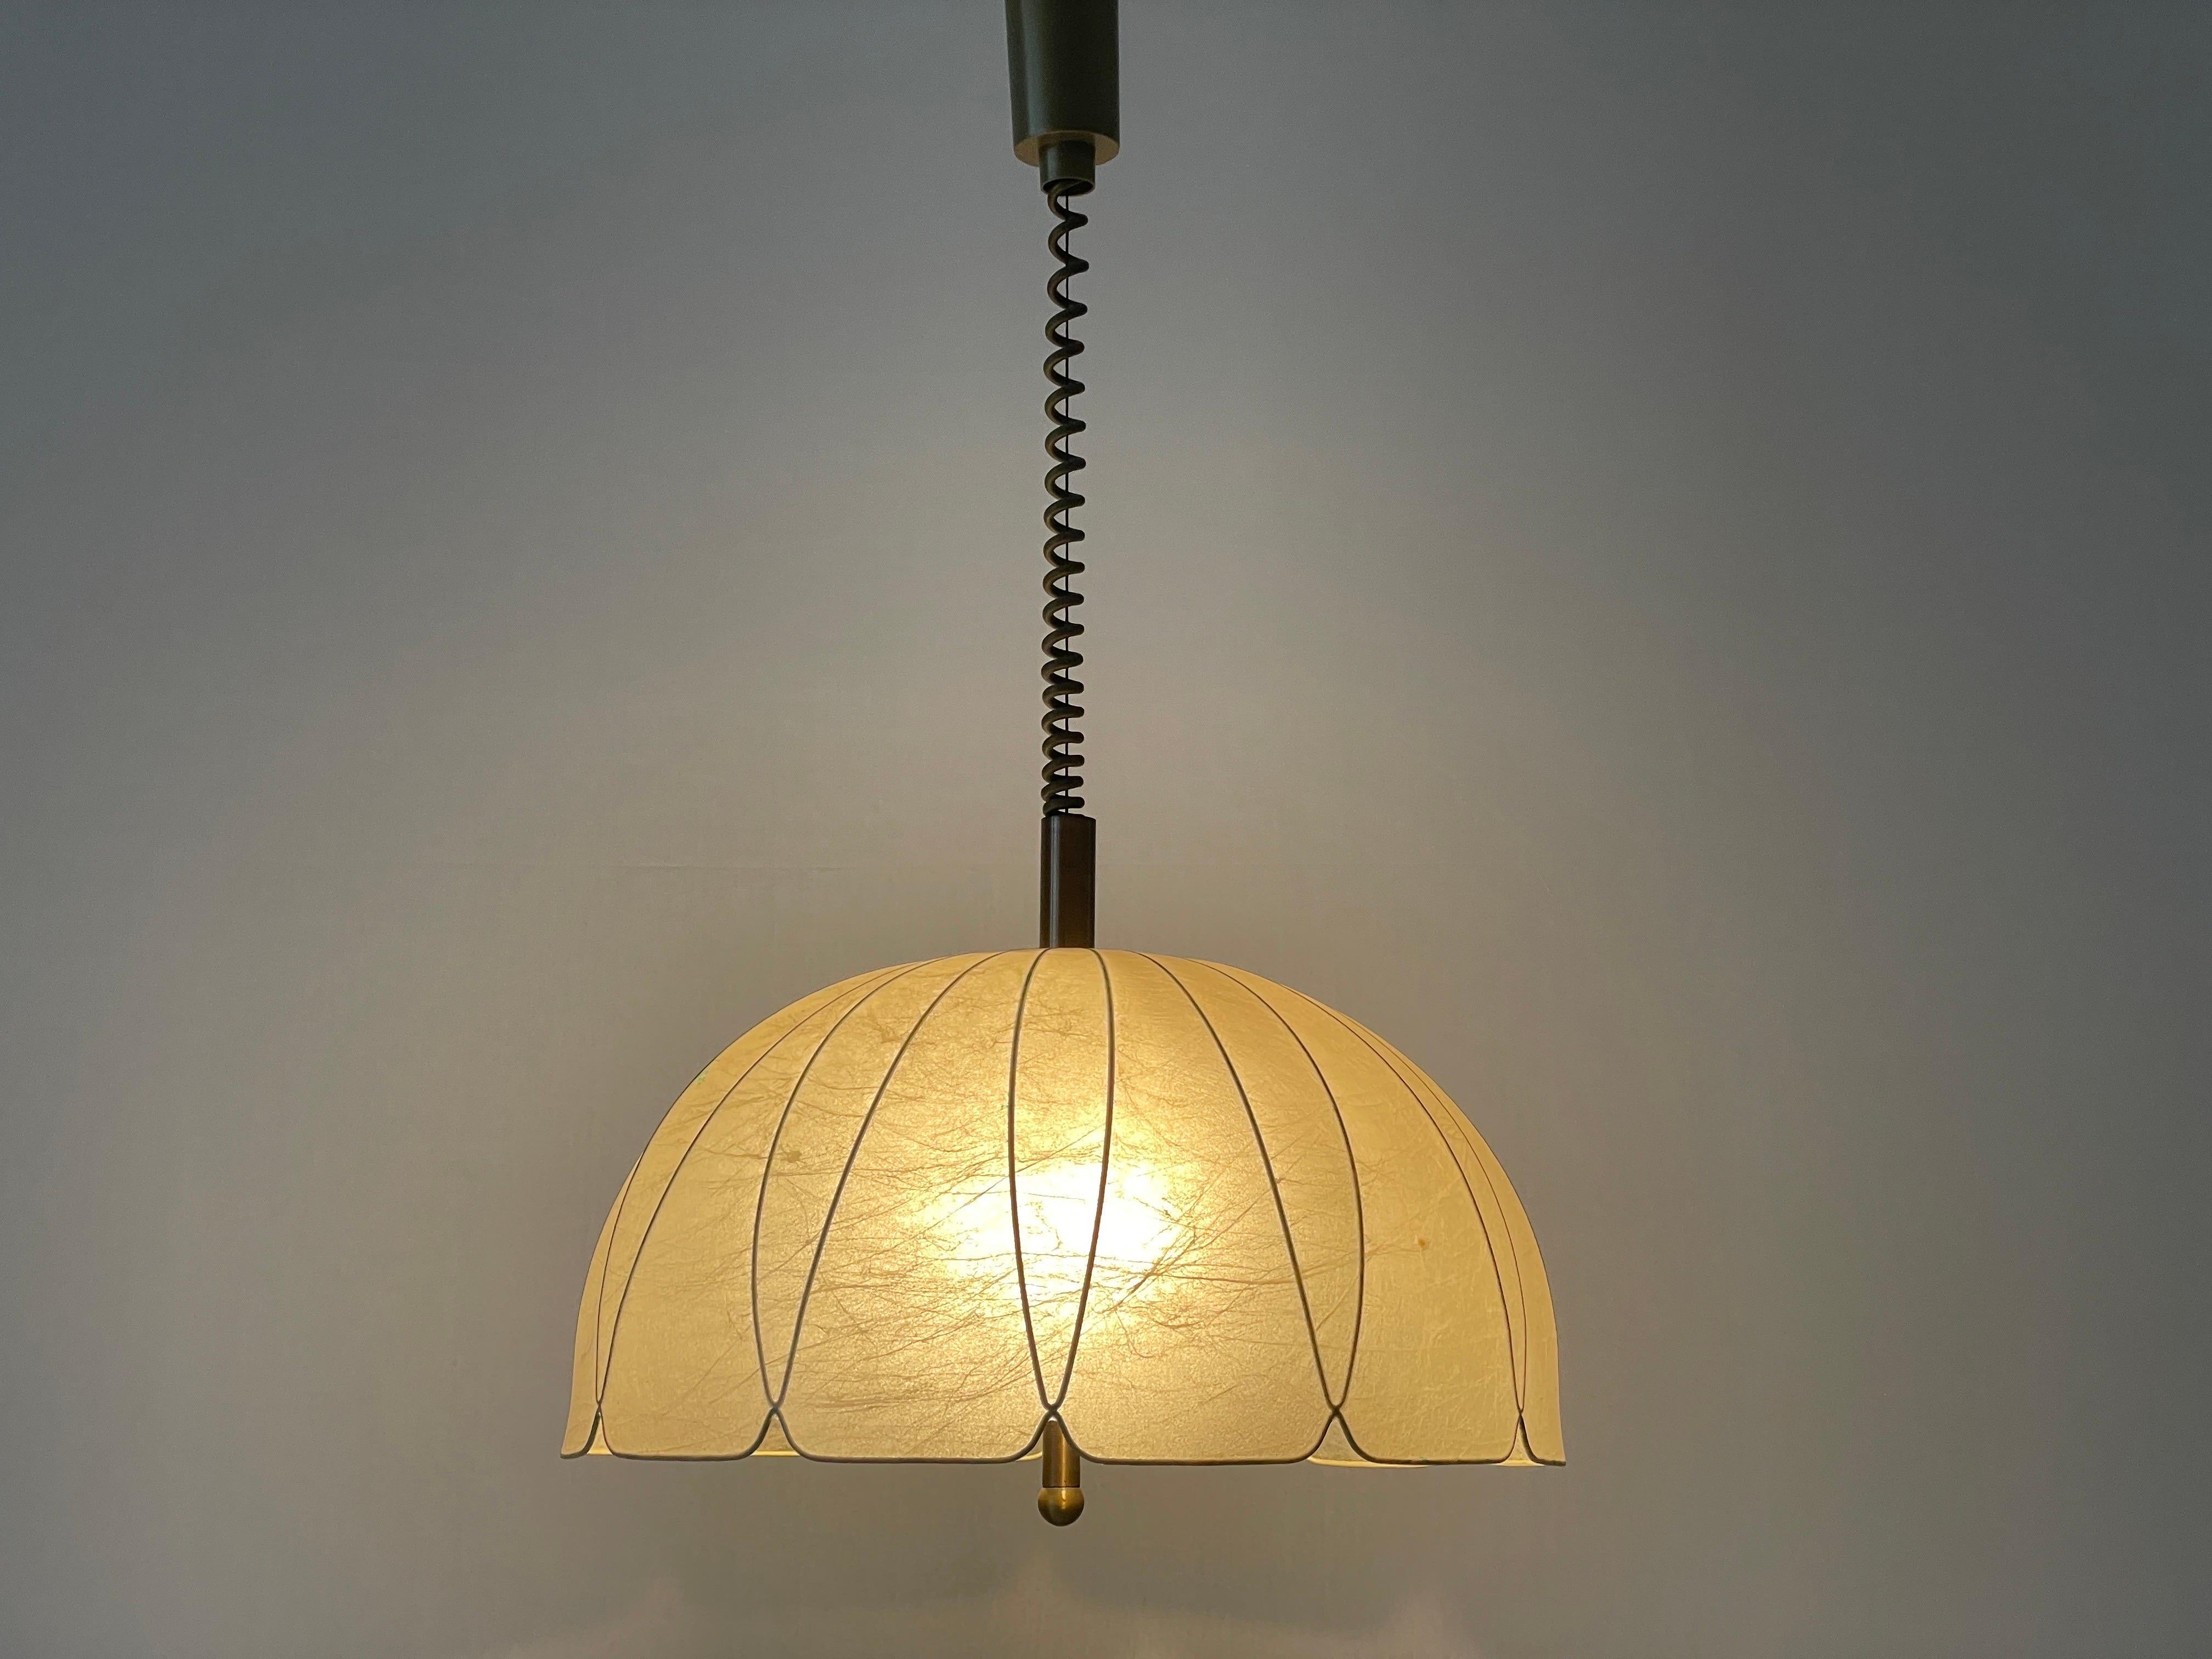 Flower Design Cocoon Adjustable Height Pendant Lamp by Goldkant, 1960s, Germany For Sale 8